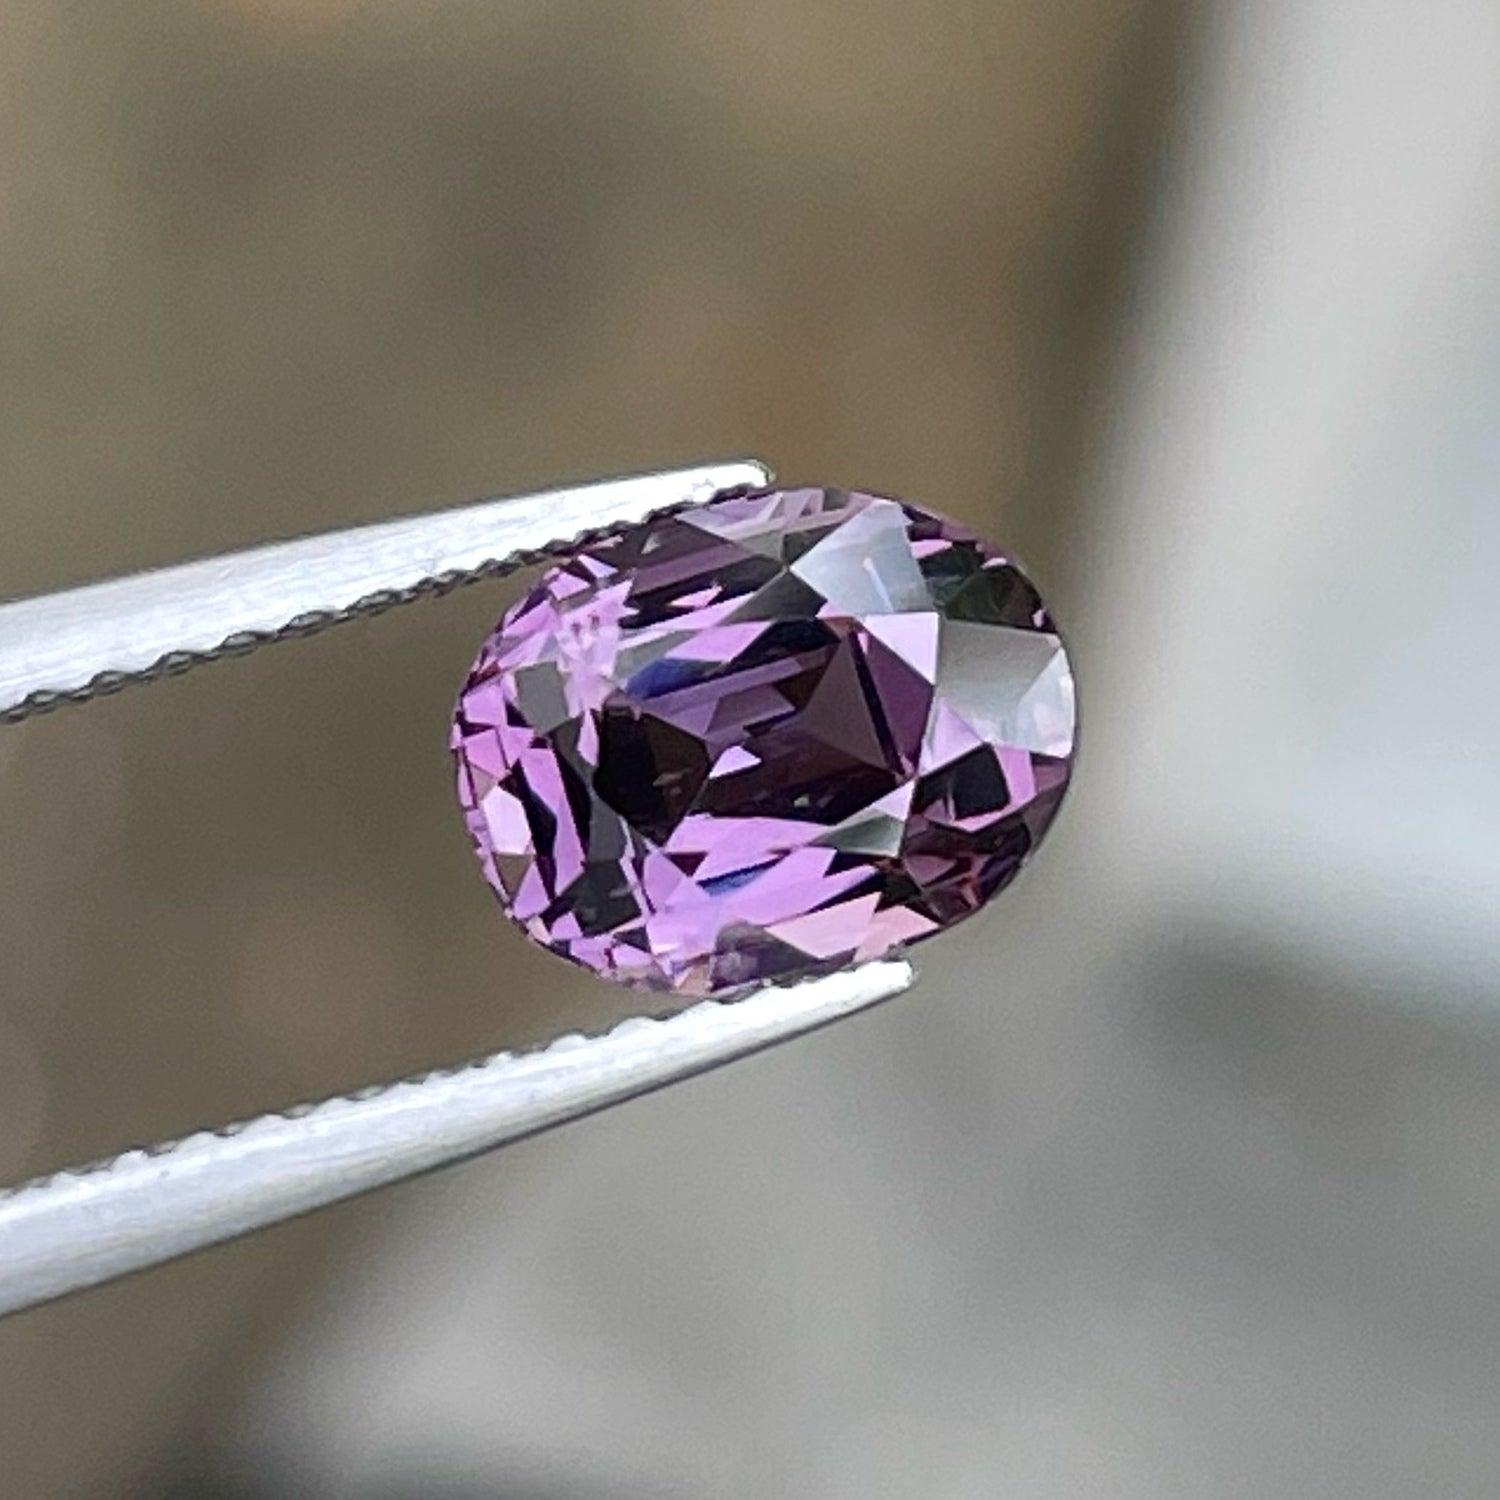 spinel price